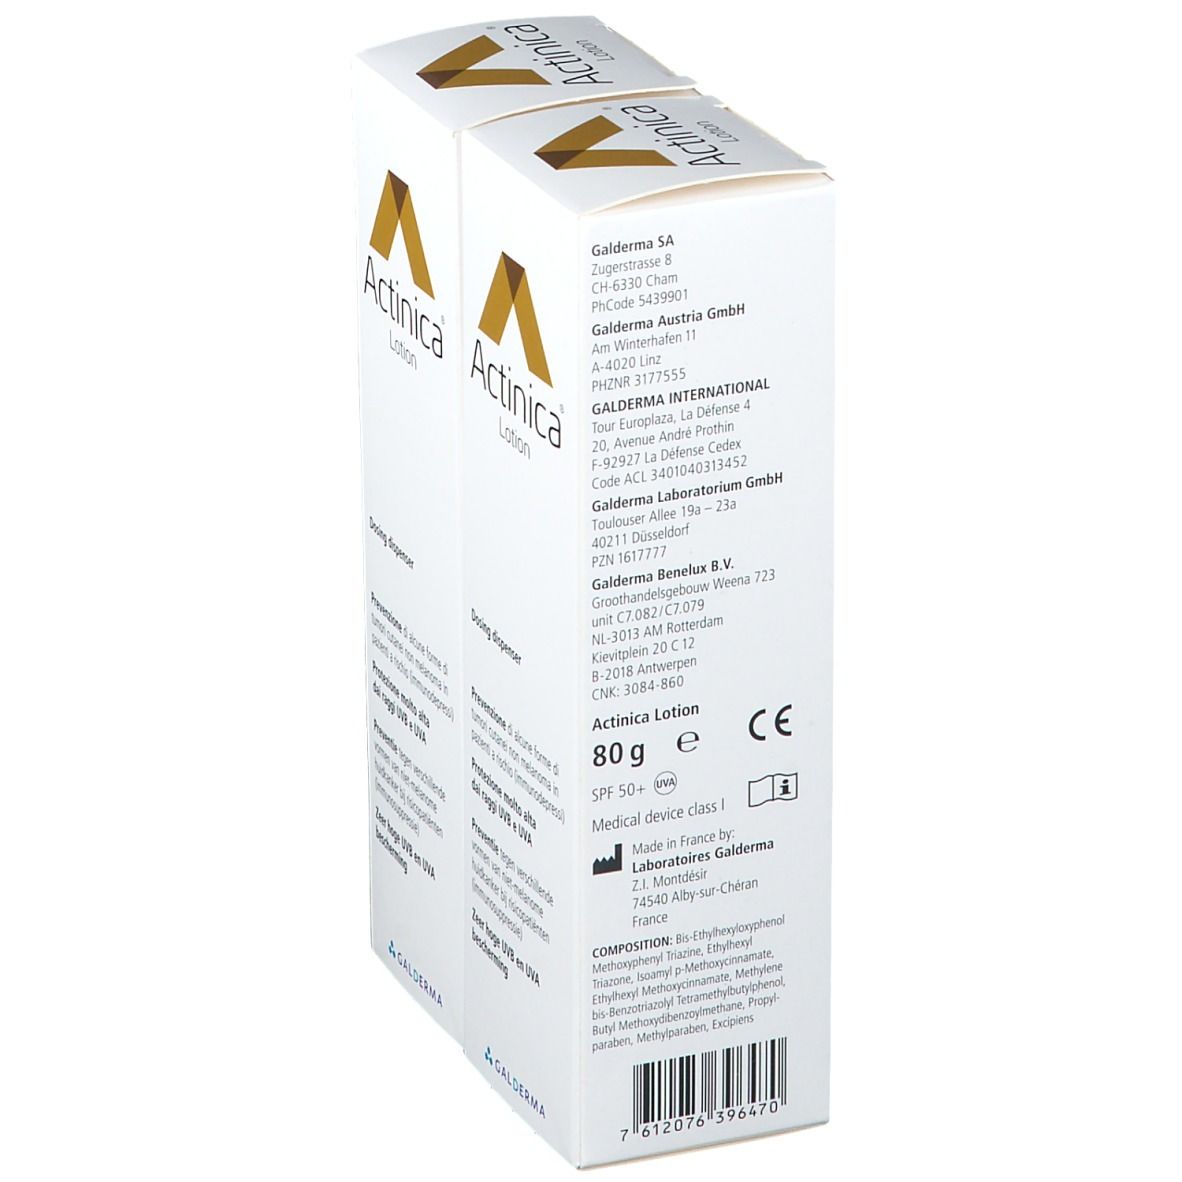 Actinica® Lotion